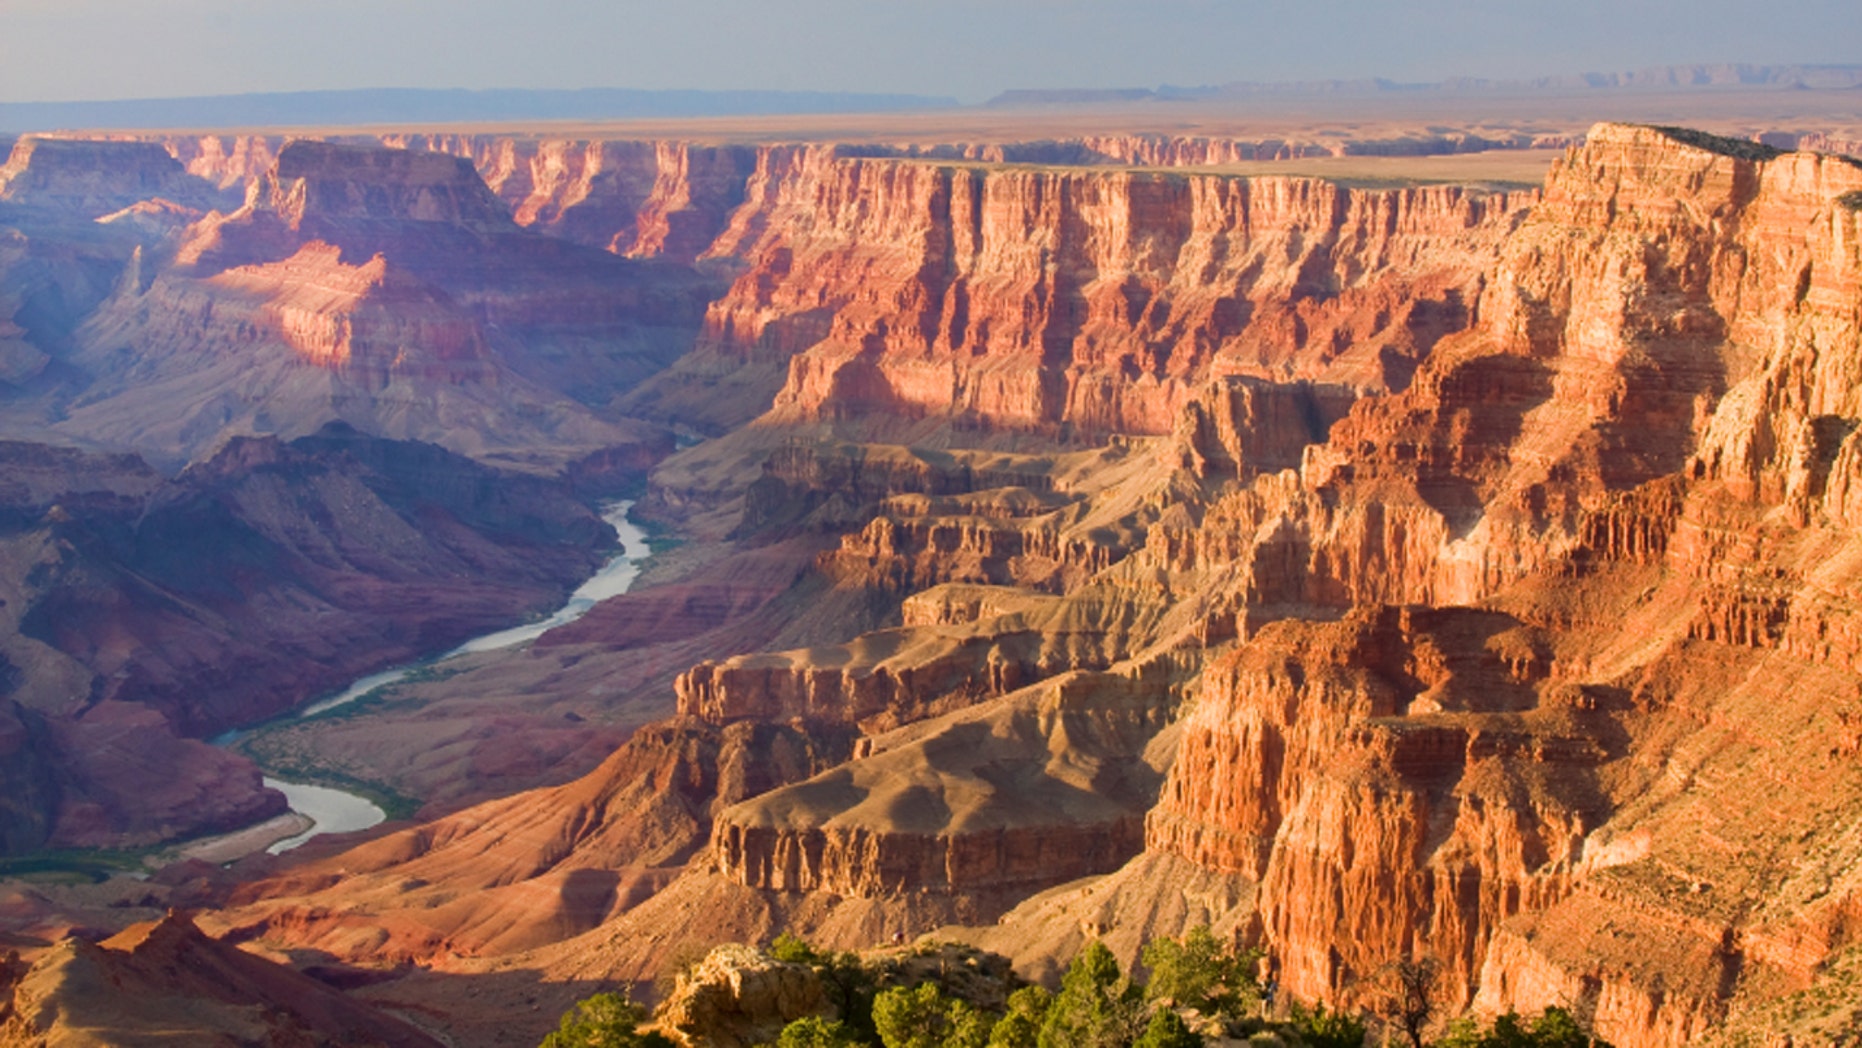 Christian geologist sues Grand Canyon for religious discrimination ...